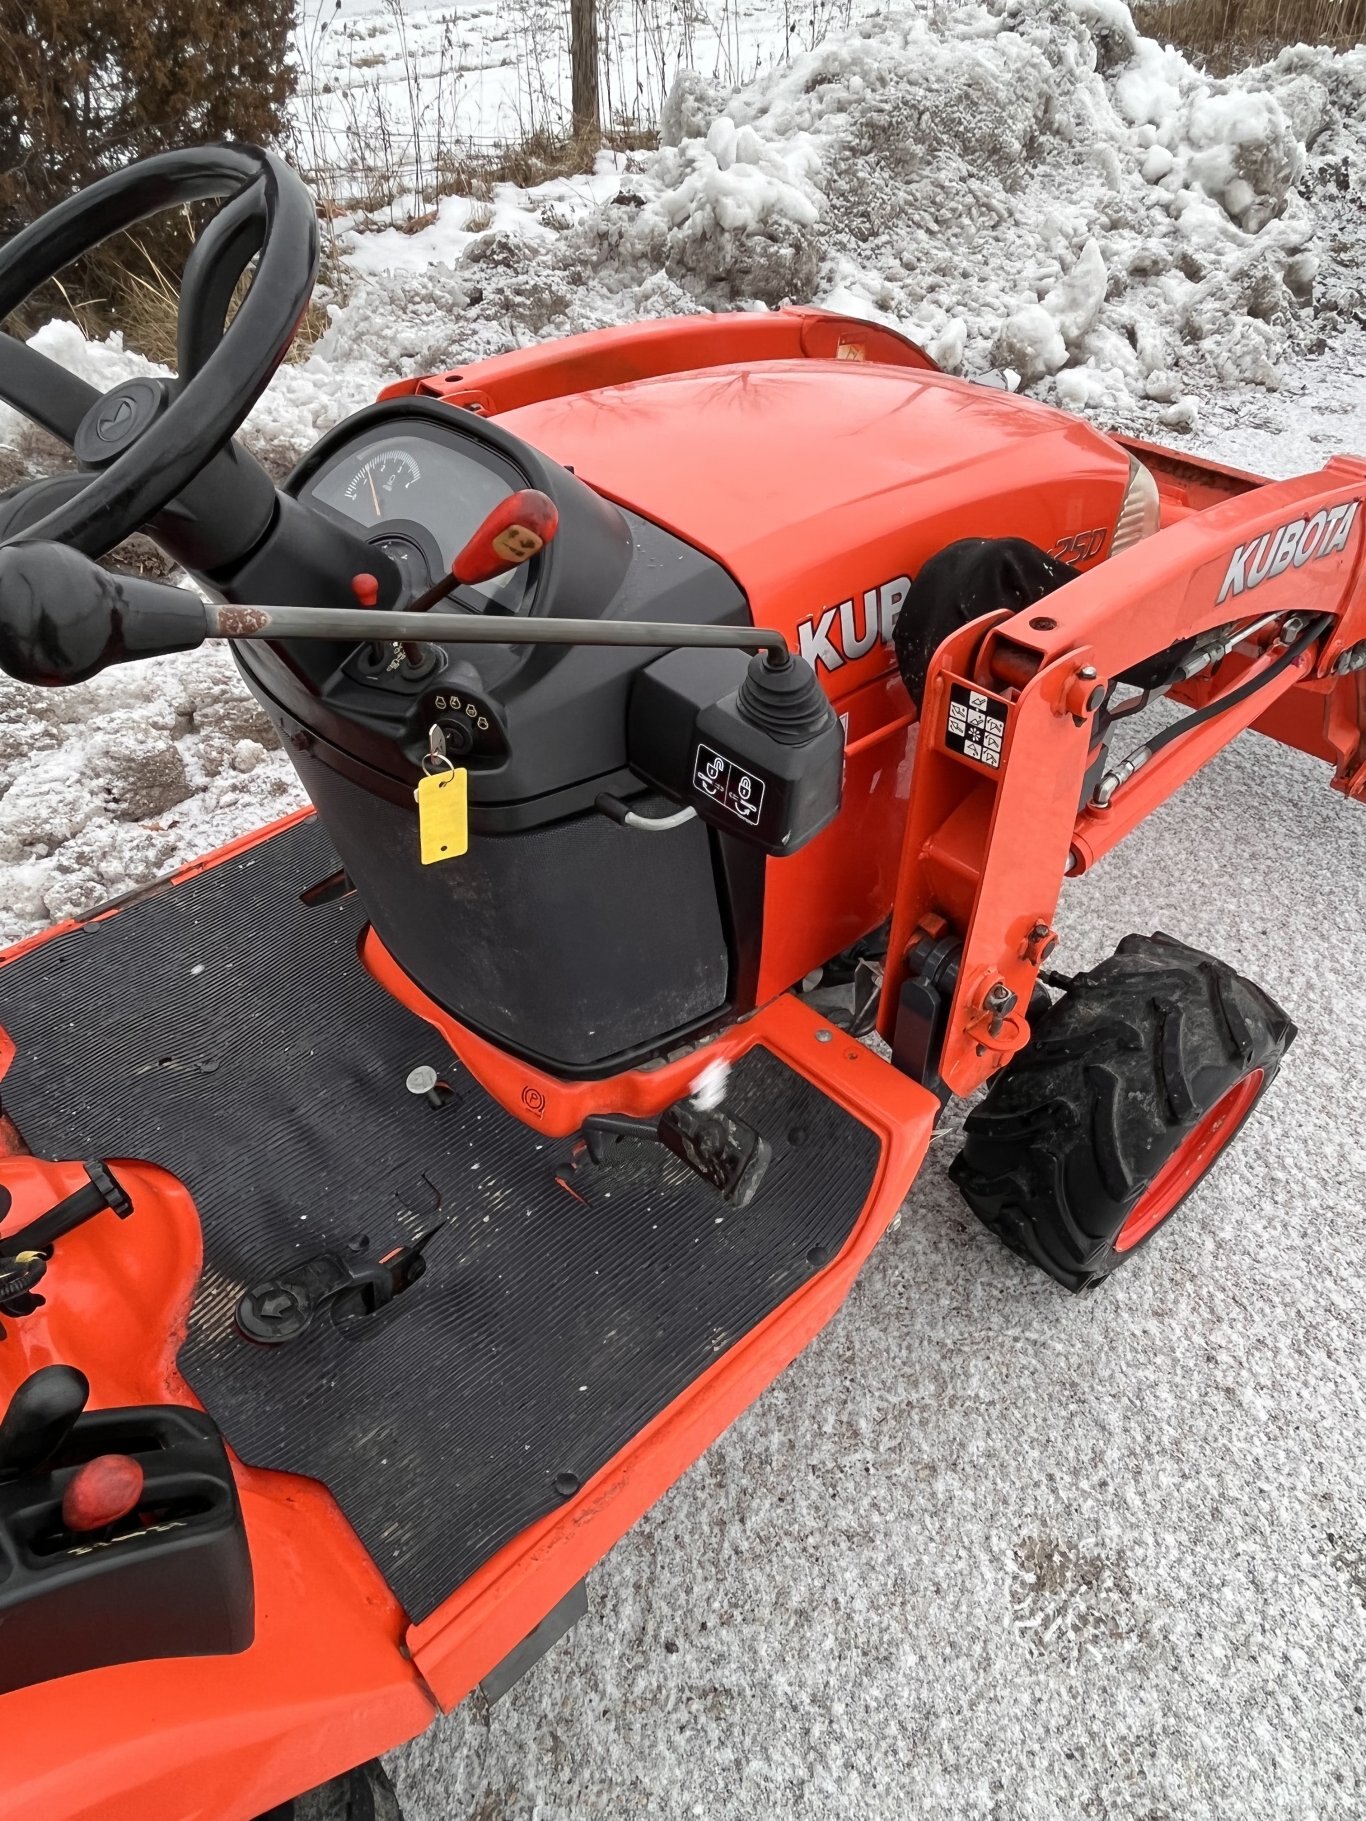 2013 KUBOTA BX25 TLB Compact 4x4 Tractor with Backhoe & Loader